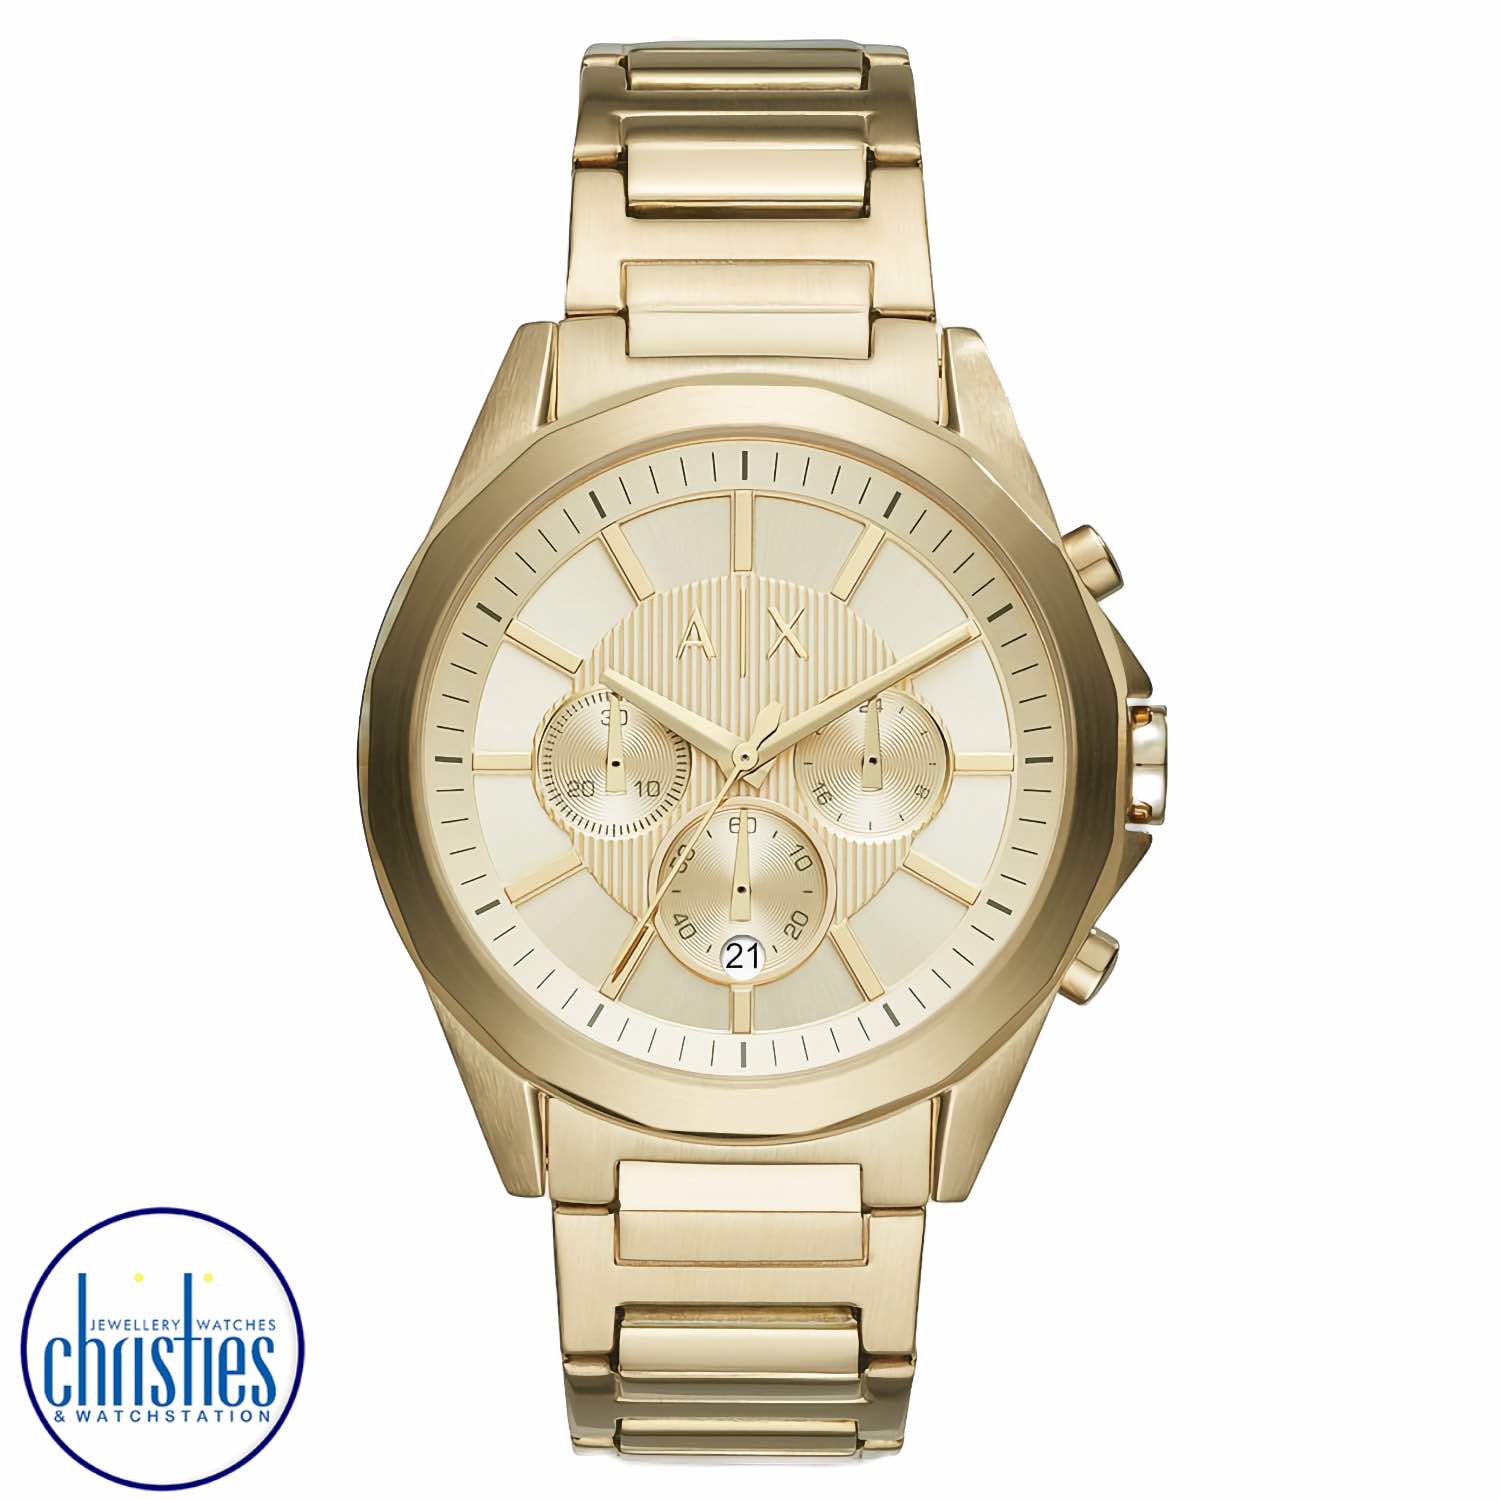 AX2602 A|X Armani Exchange Chronograph Gold-Tone Stainless Steel Watch. AX2602 A|X Armani Exchange Chronograph Gold-Tone Stainless Steel WatchAfterpay - Split your purchase into 4 instalments - Pay for your purchase over 4 instalments, due every two weeks